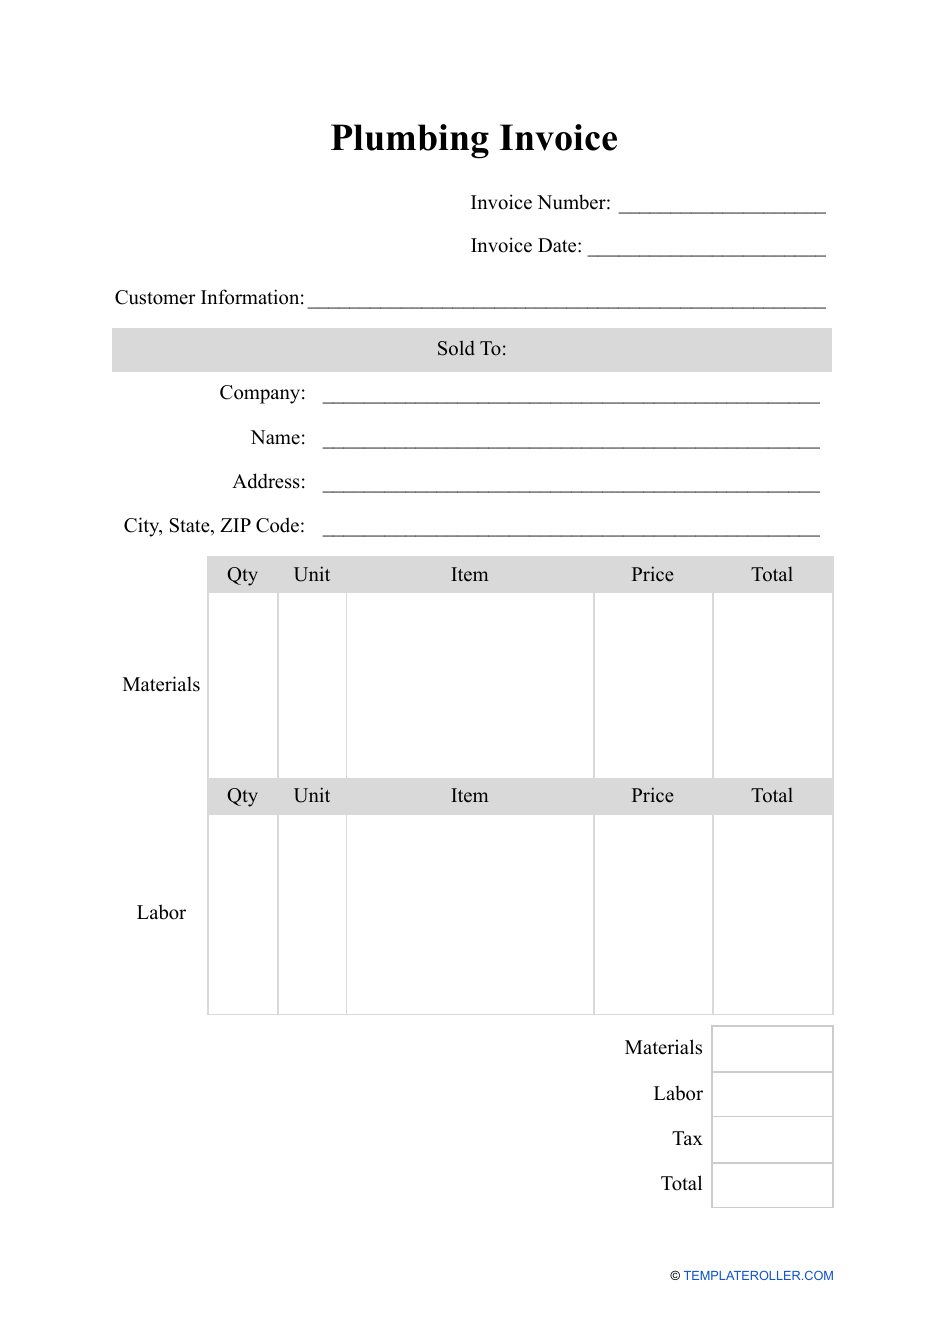 Plumbing Invoice Template Fill Out, Sign Online and Download PDF